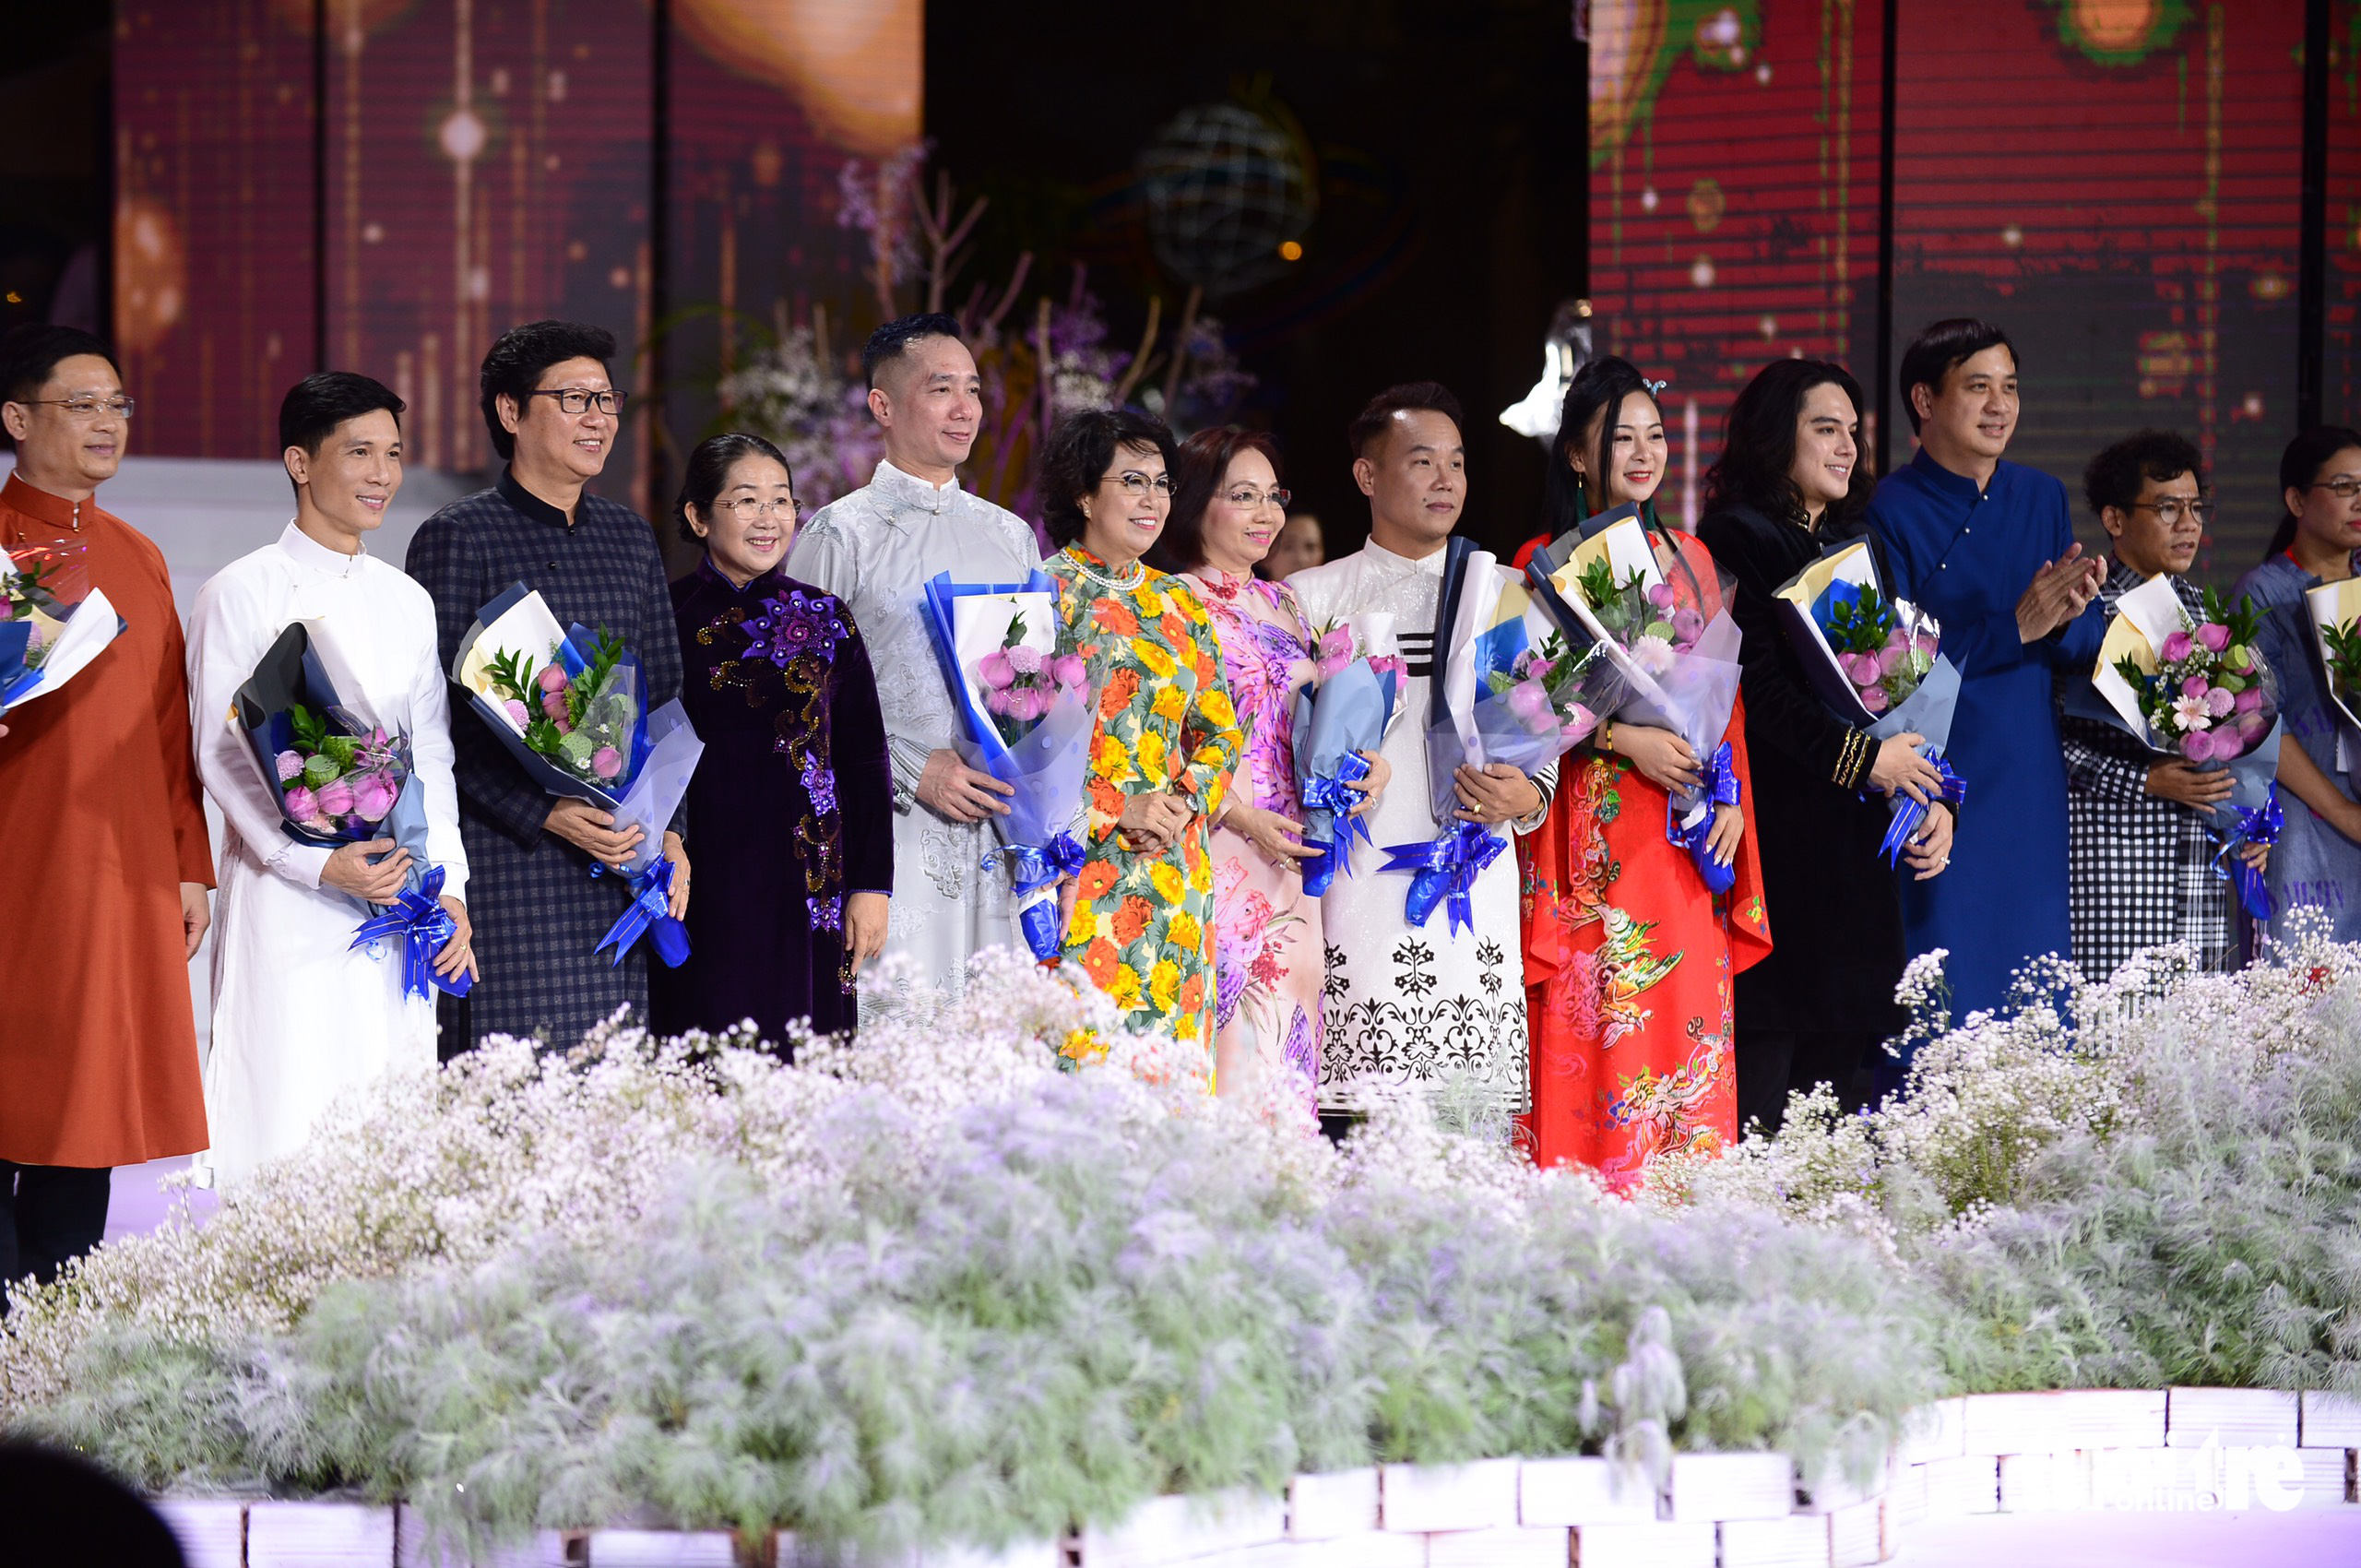 The eighth Ho Chi Minh City Ao Dai Festival kicks off on Nguyen Hue Pedestrian Street in District 1, March 5, 2022. Photo: Quang Dinh / Tuoi Tre